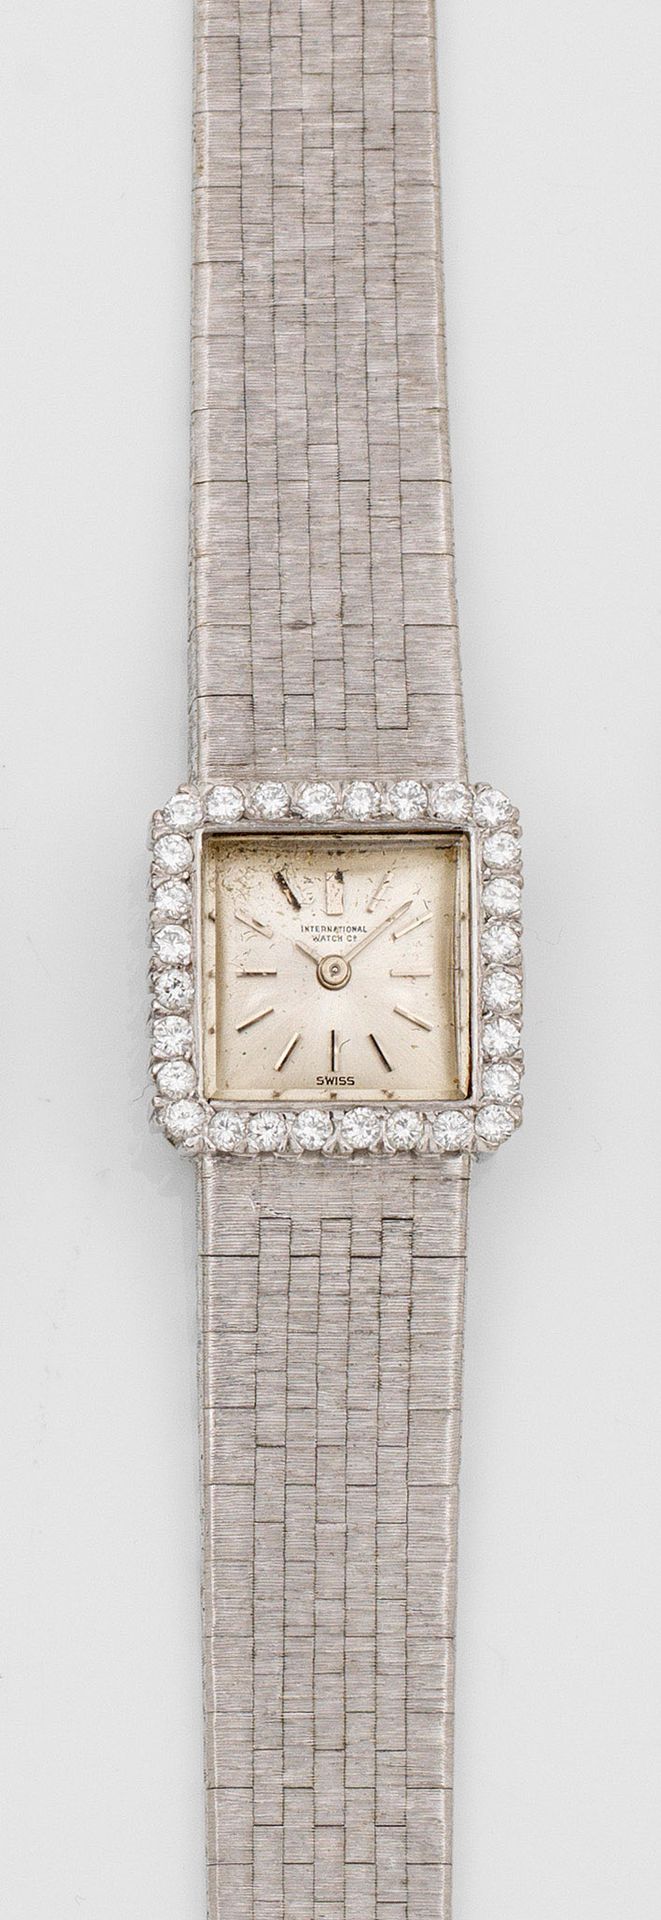 Null Ladies' wristwatch by IWC-Schaffhausen from the 1960s, made of white gold, &hellip;